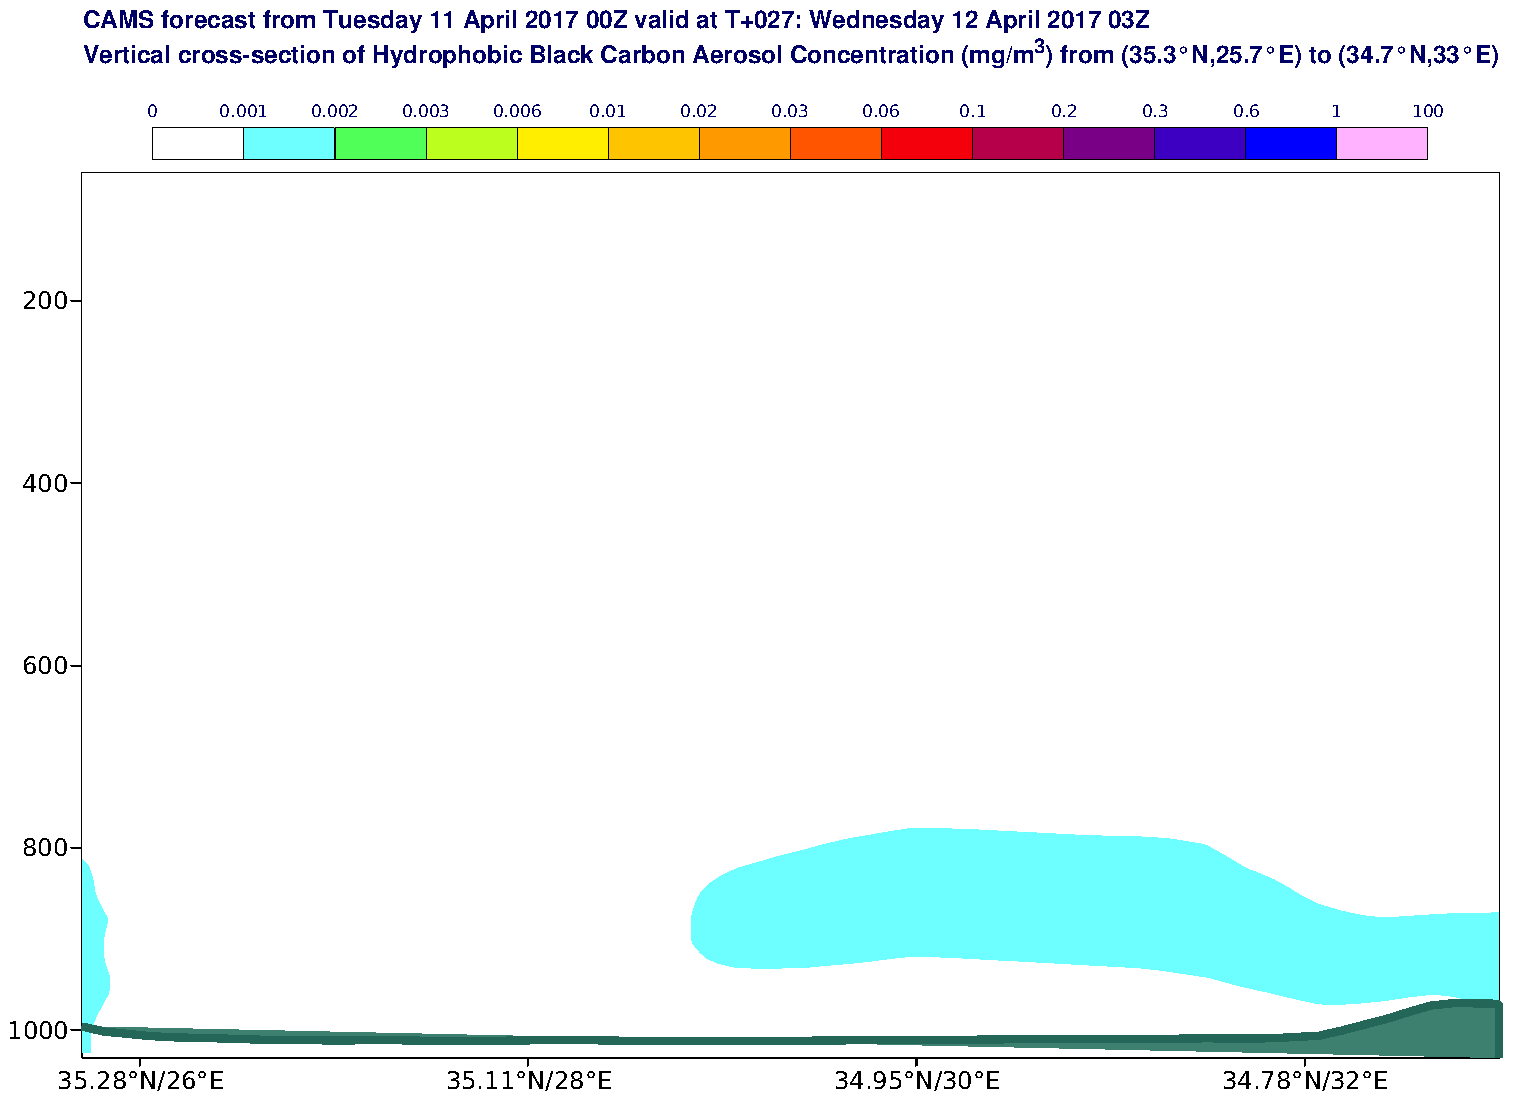 Vertical cross-section of Hydrophobic Black Carbon Aerosol Concentration (mg/m3) valid at T27 - 2017-04-12 03:00